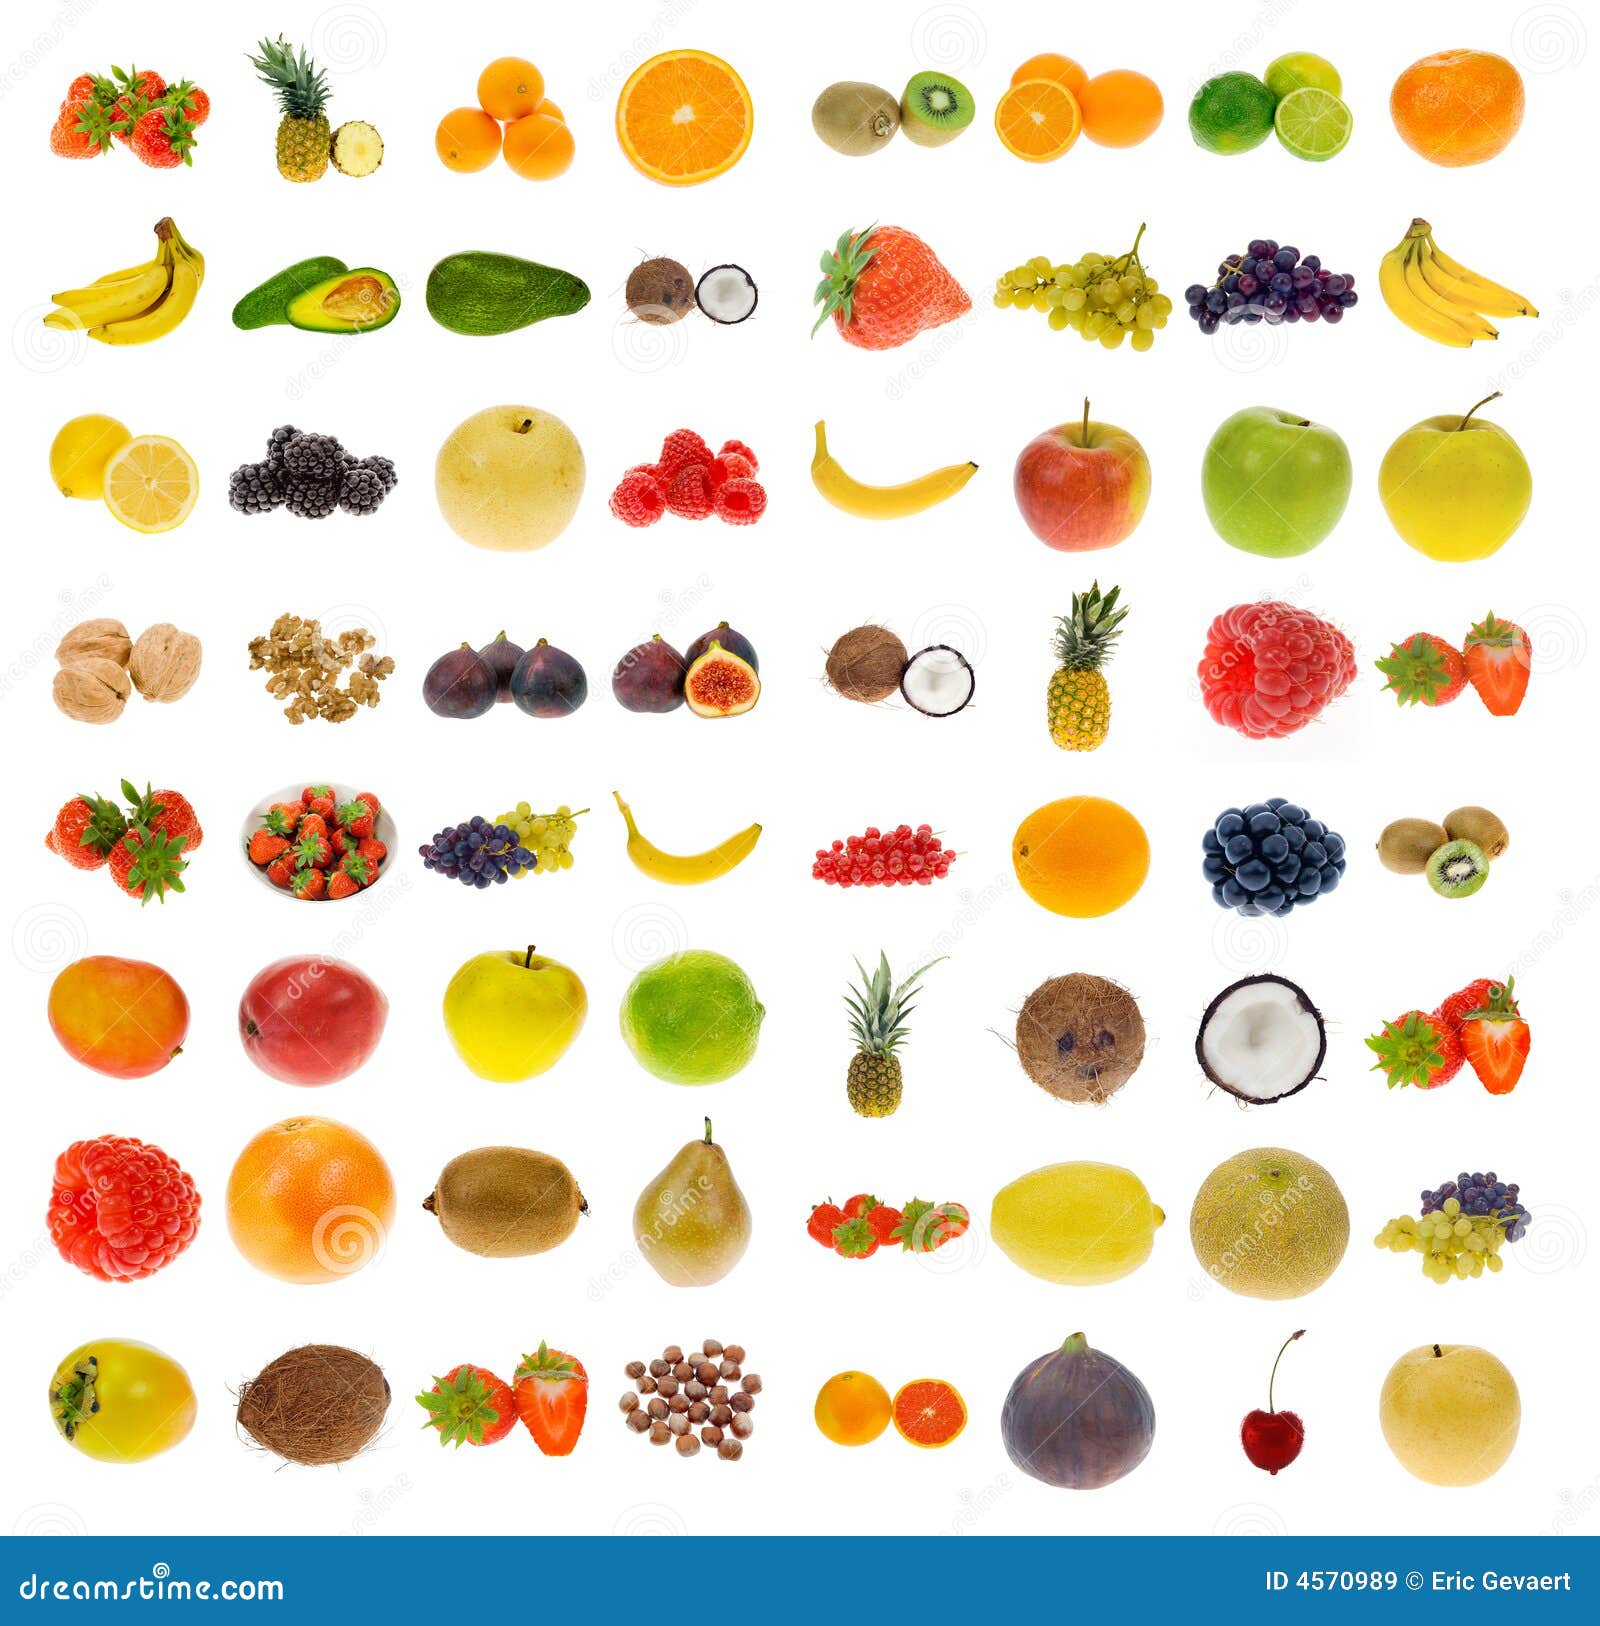 account steenkool Pech Collection of Fruit and Nuts Stock Image - Image of blue, blackberry:  4570989